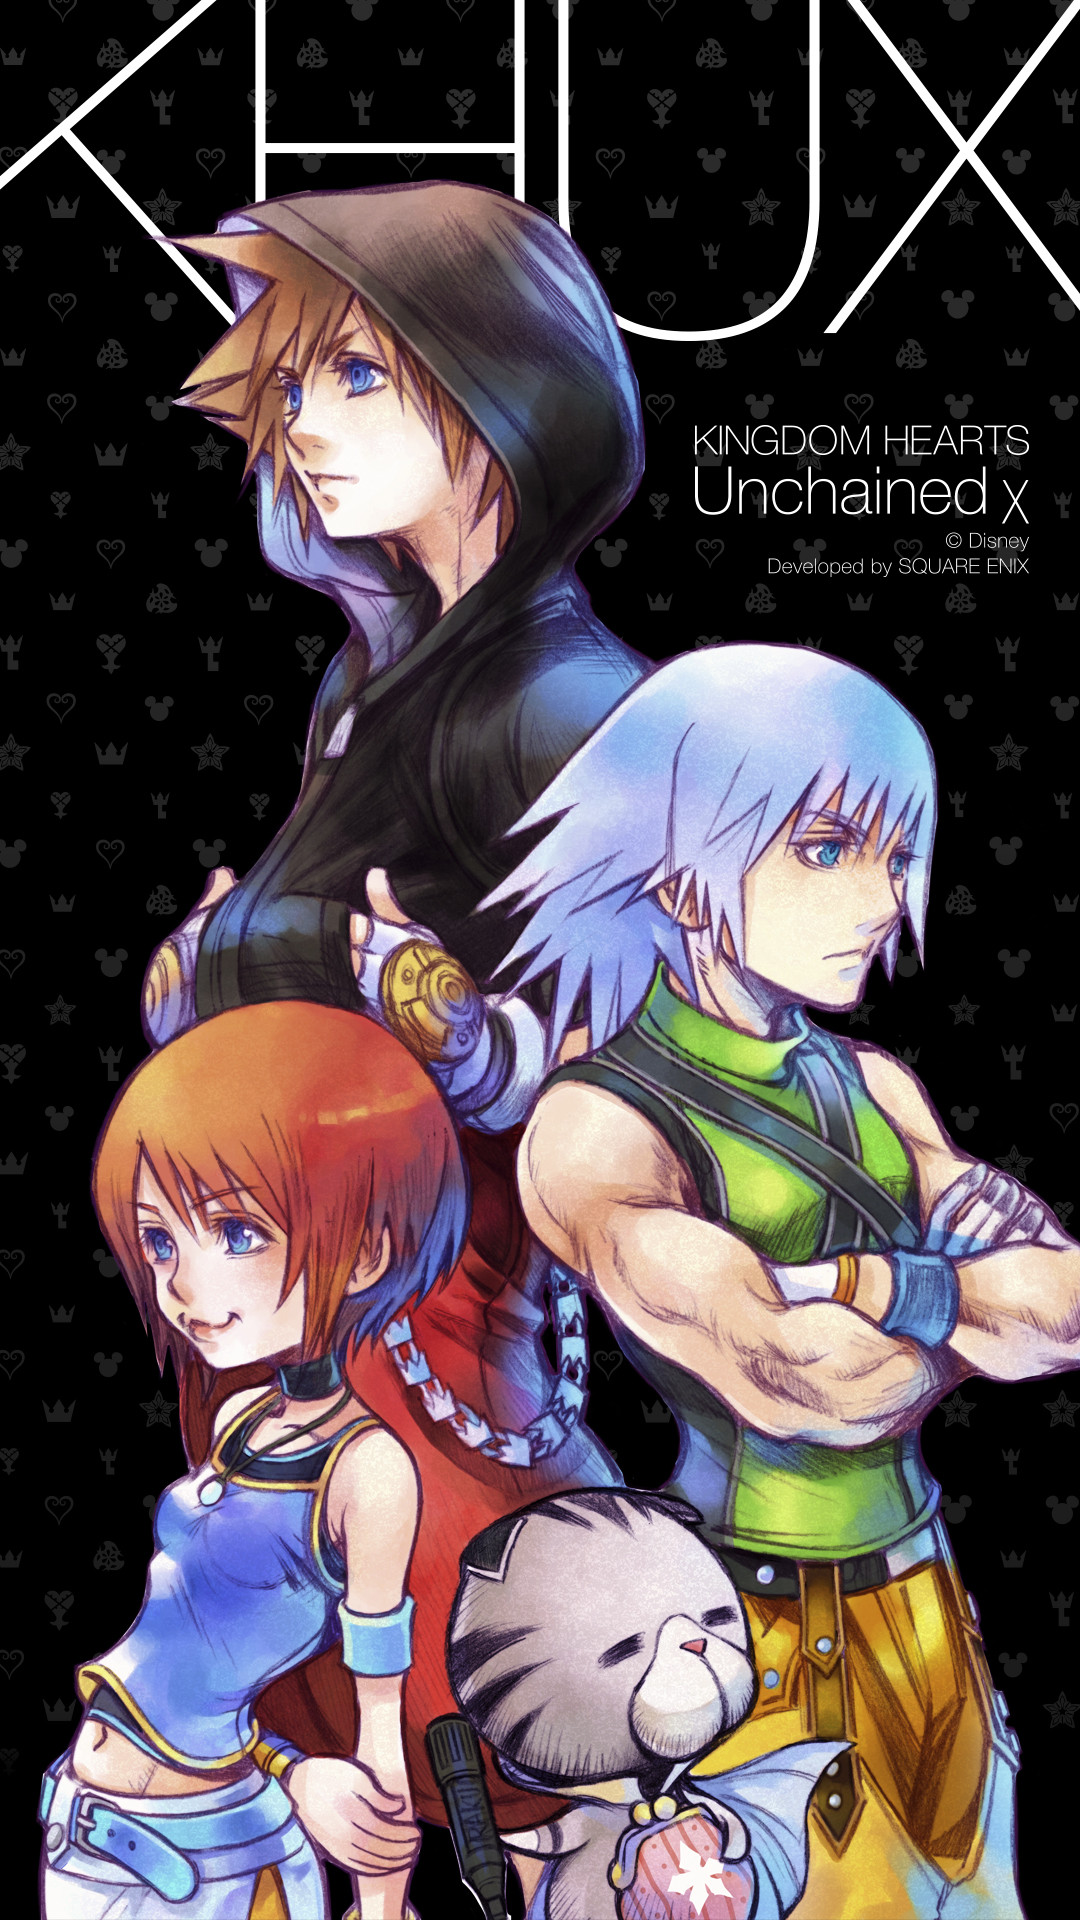 Game Kingdom Hearts Iphone Wallpapers